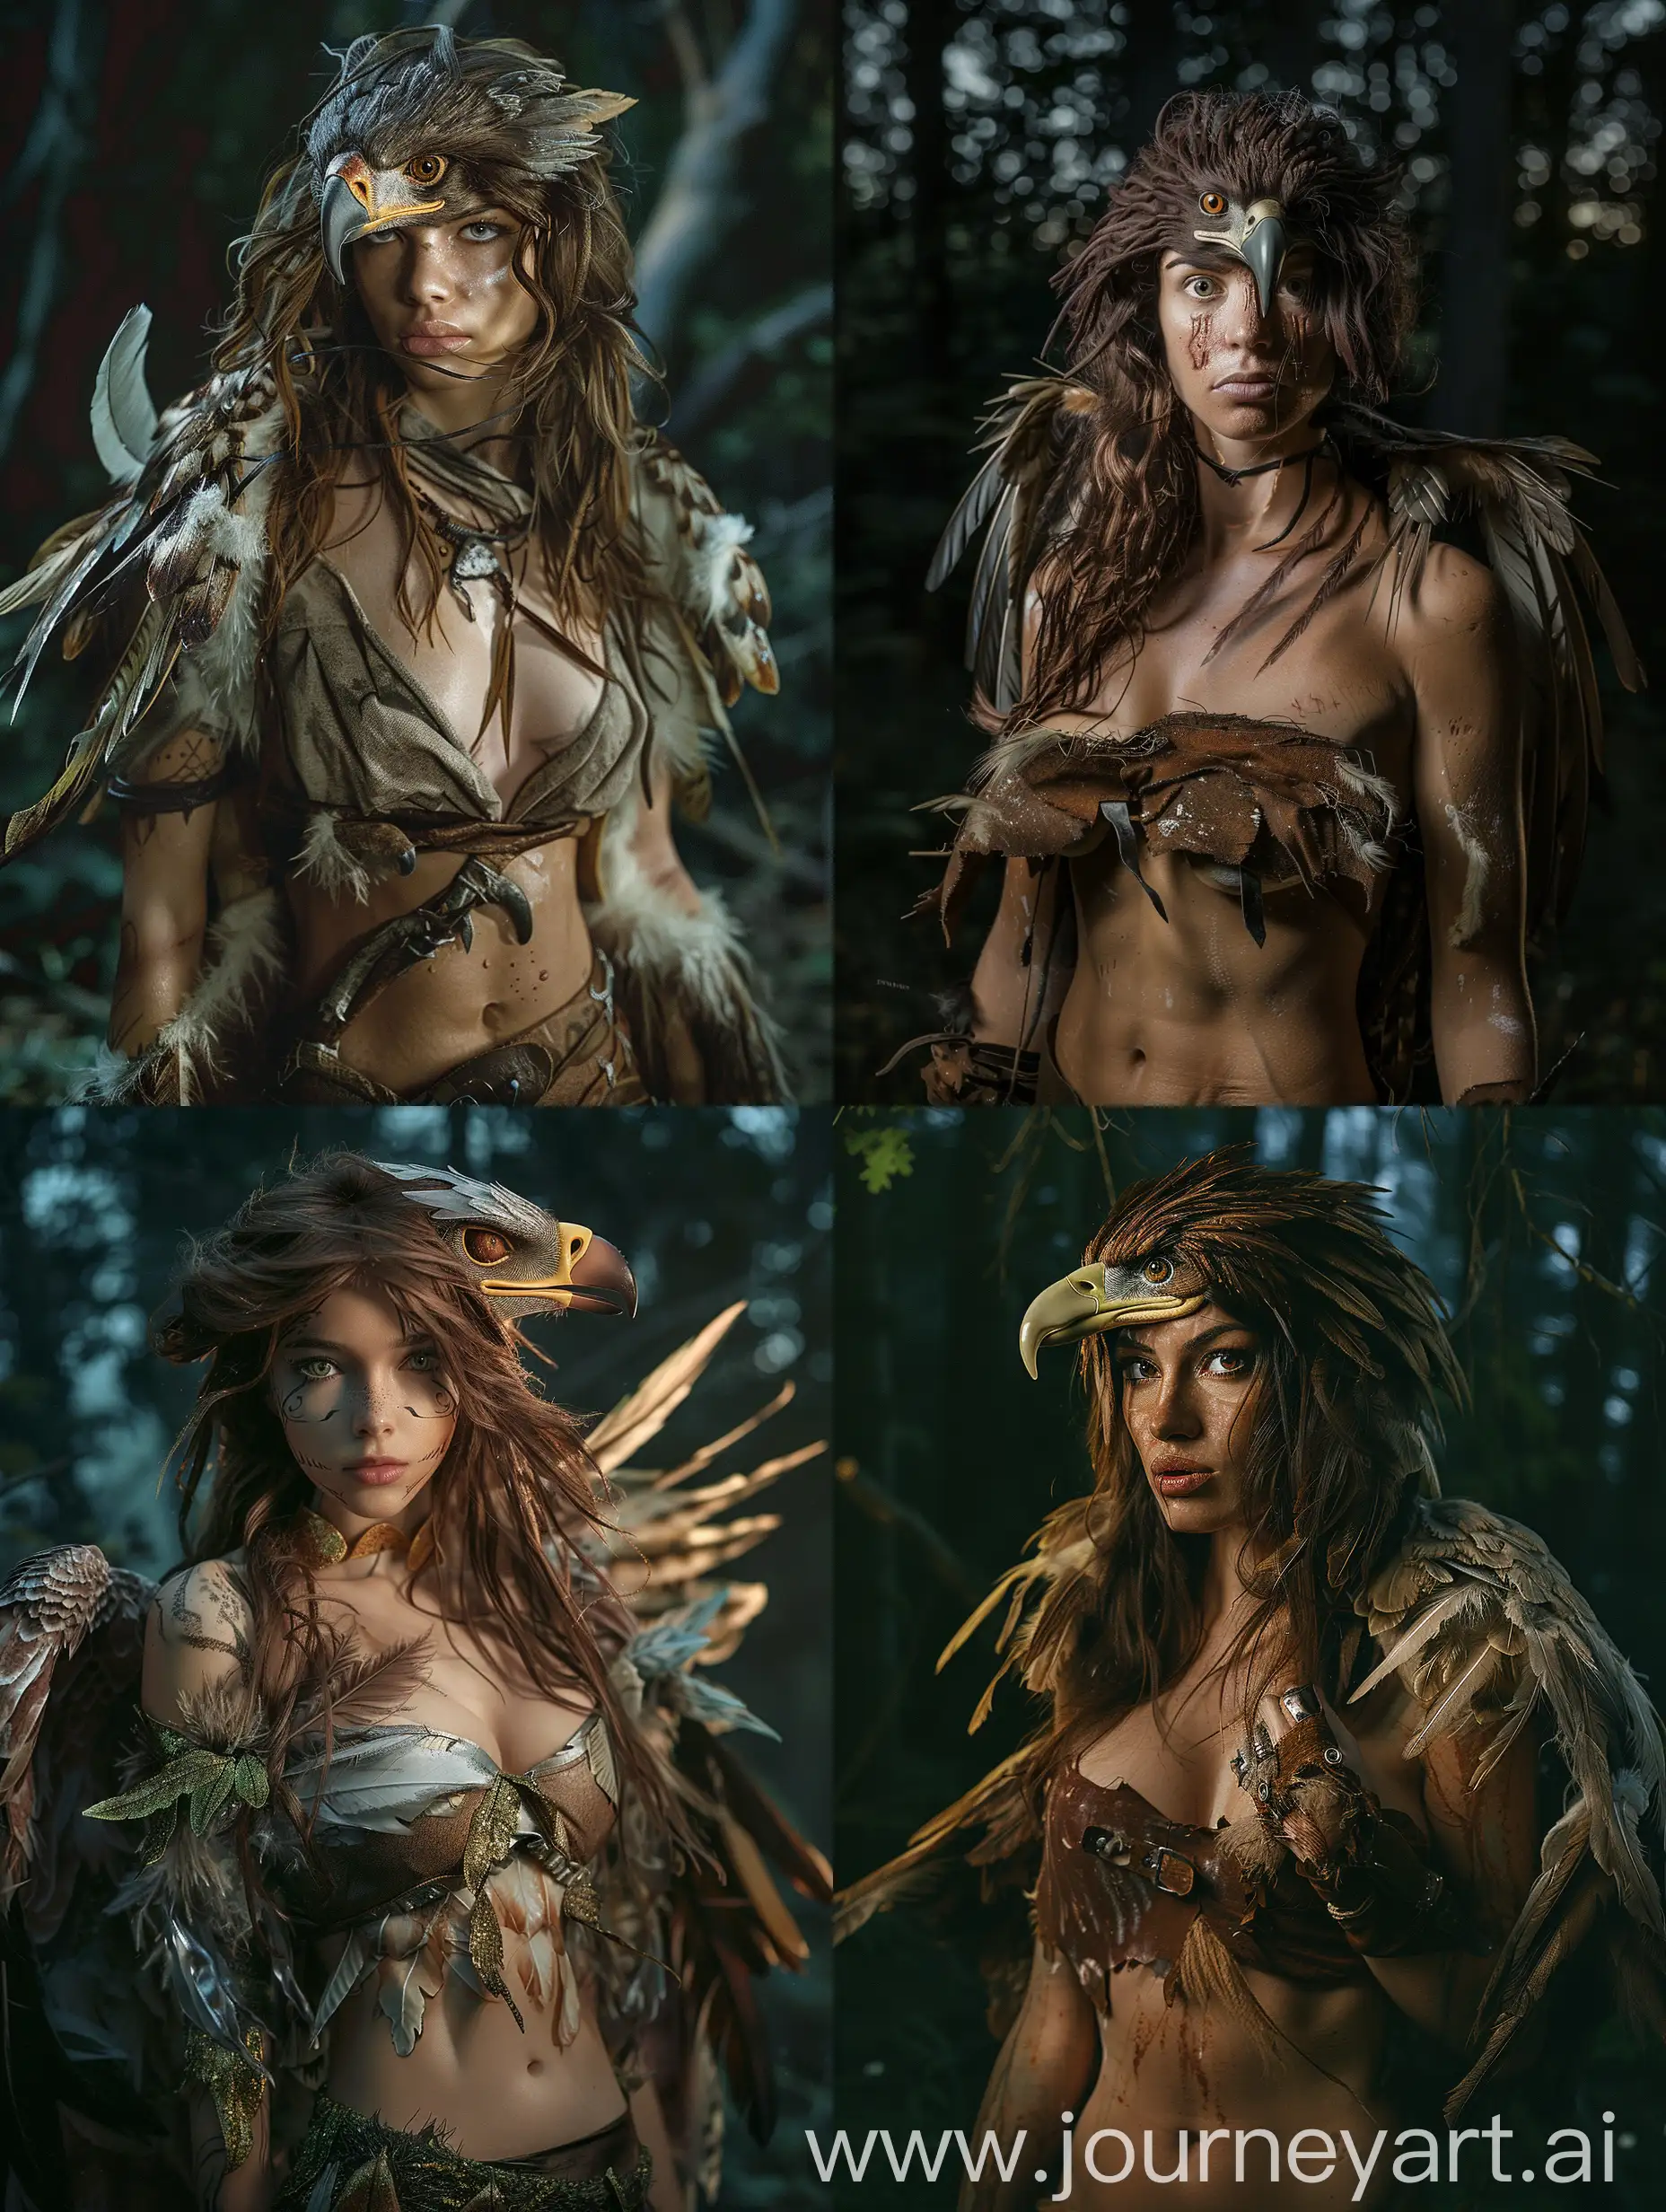 Enchanting-EagleWoman-in-Night-Forest